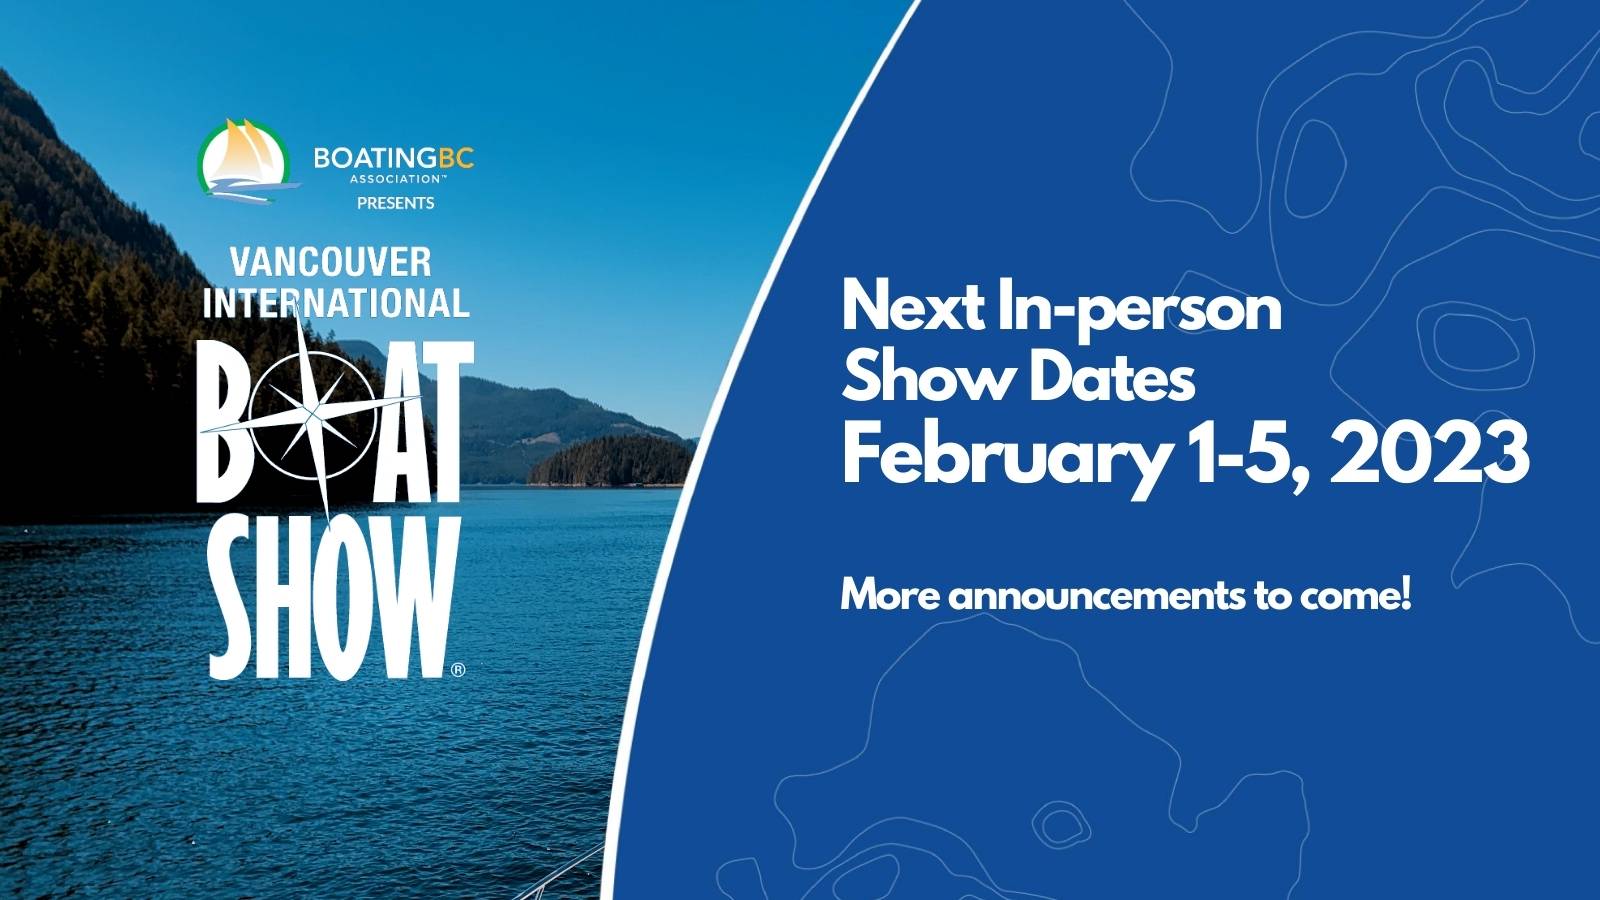 Home The 2023 Vancouver International Boat Show